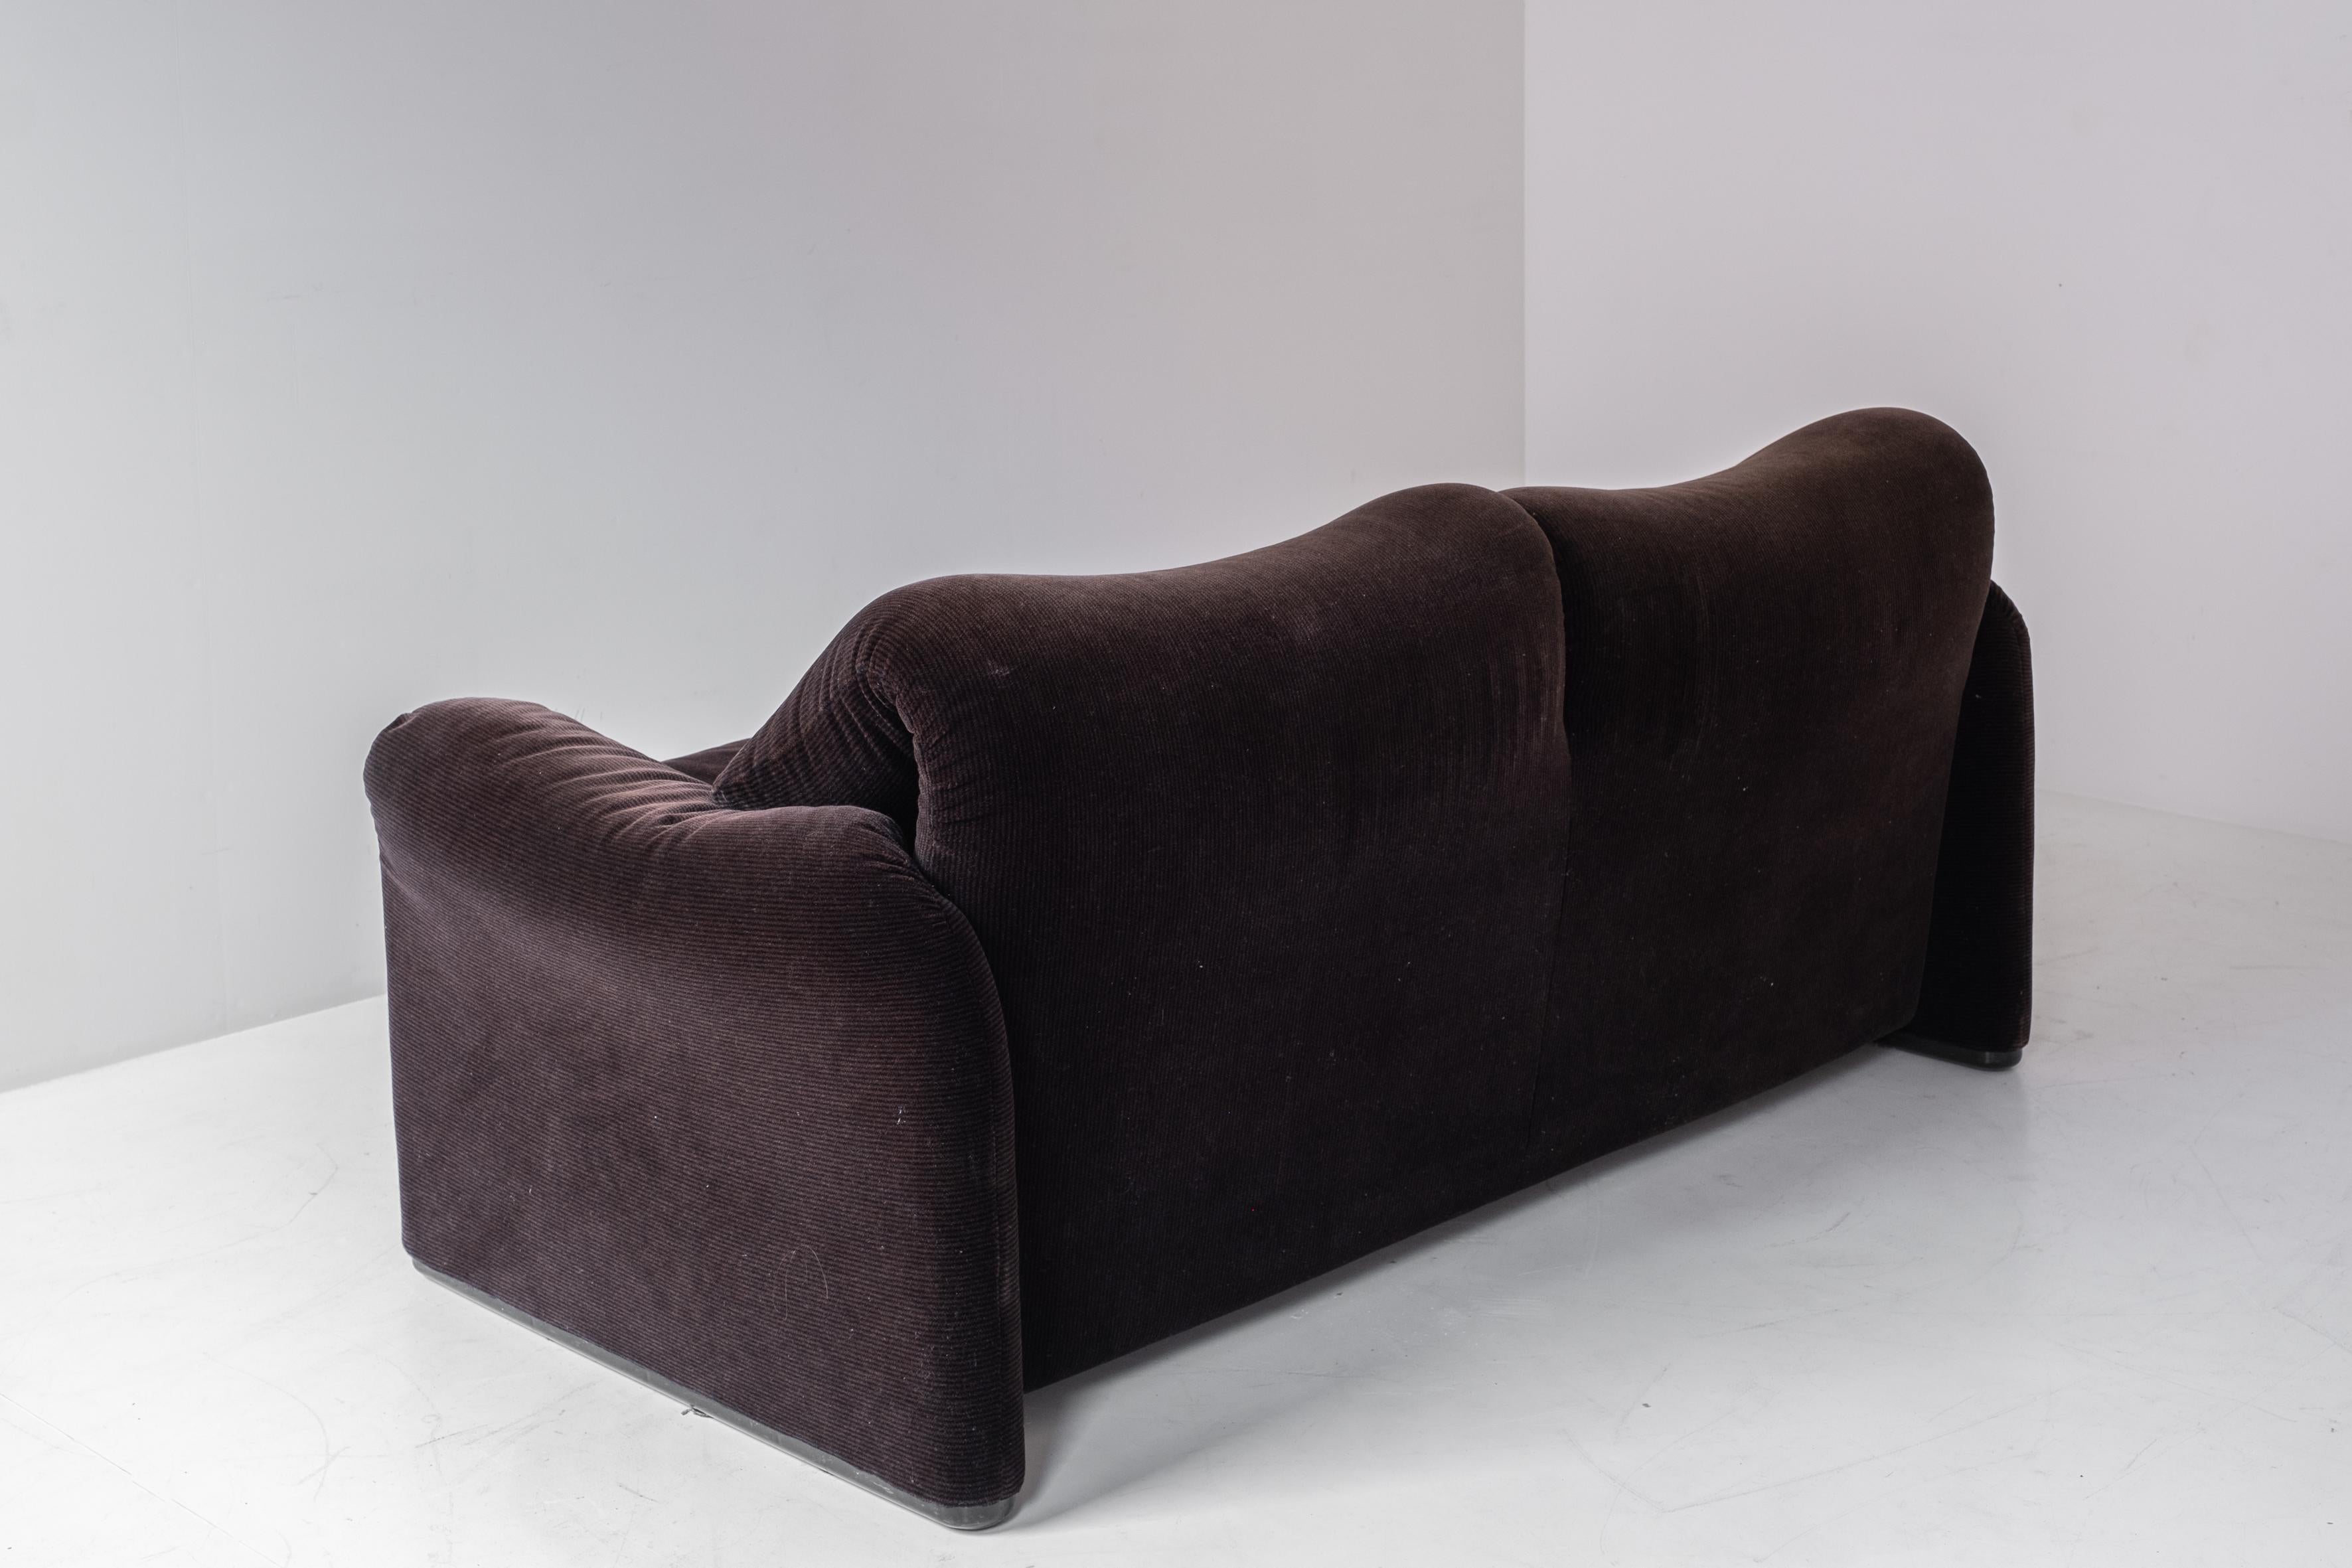 Maralunga two-seater by Vico Magistretti for Cassina, Italy 1970s. 1